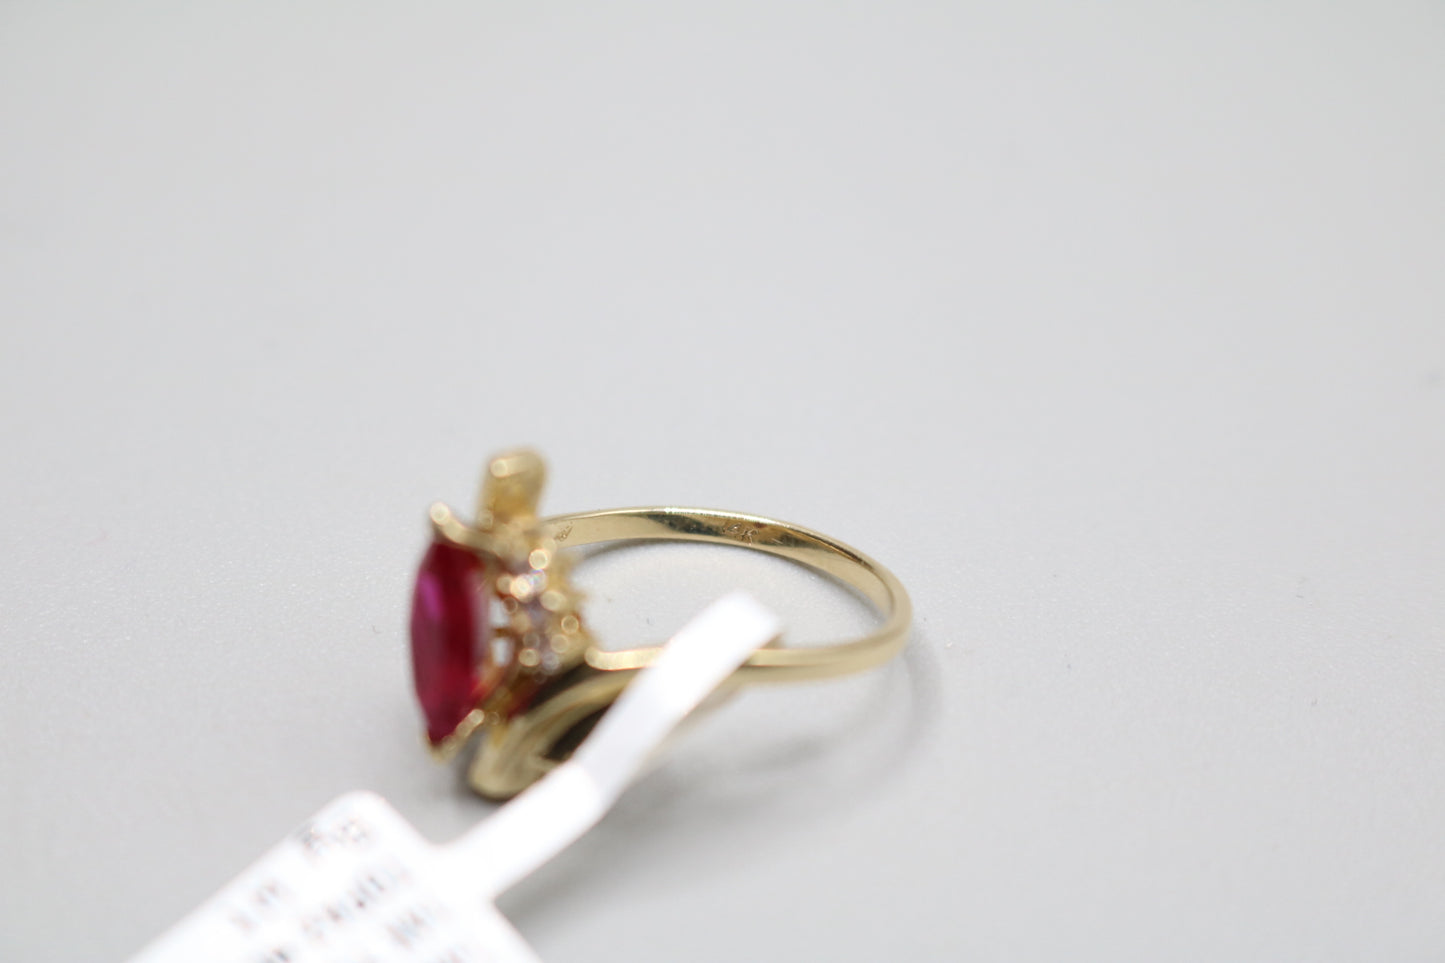 14K Yellow Gold Ring with Ruby and Clear Stones (Size 7)